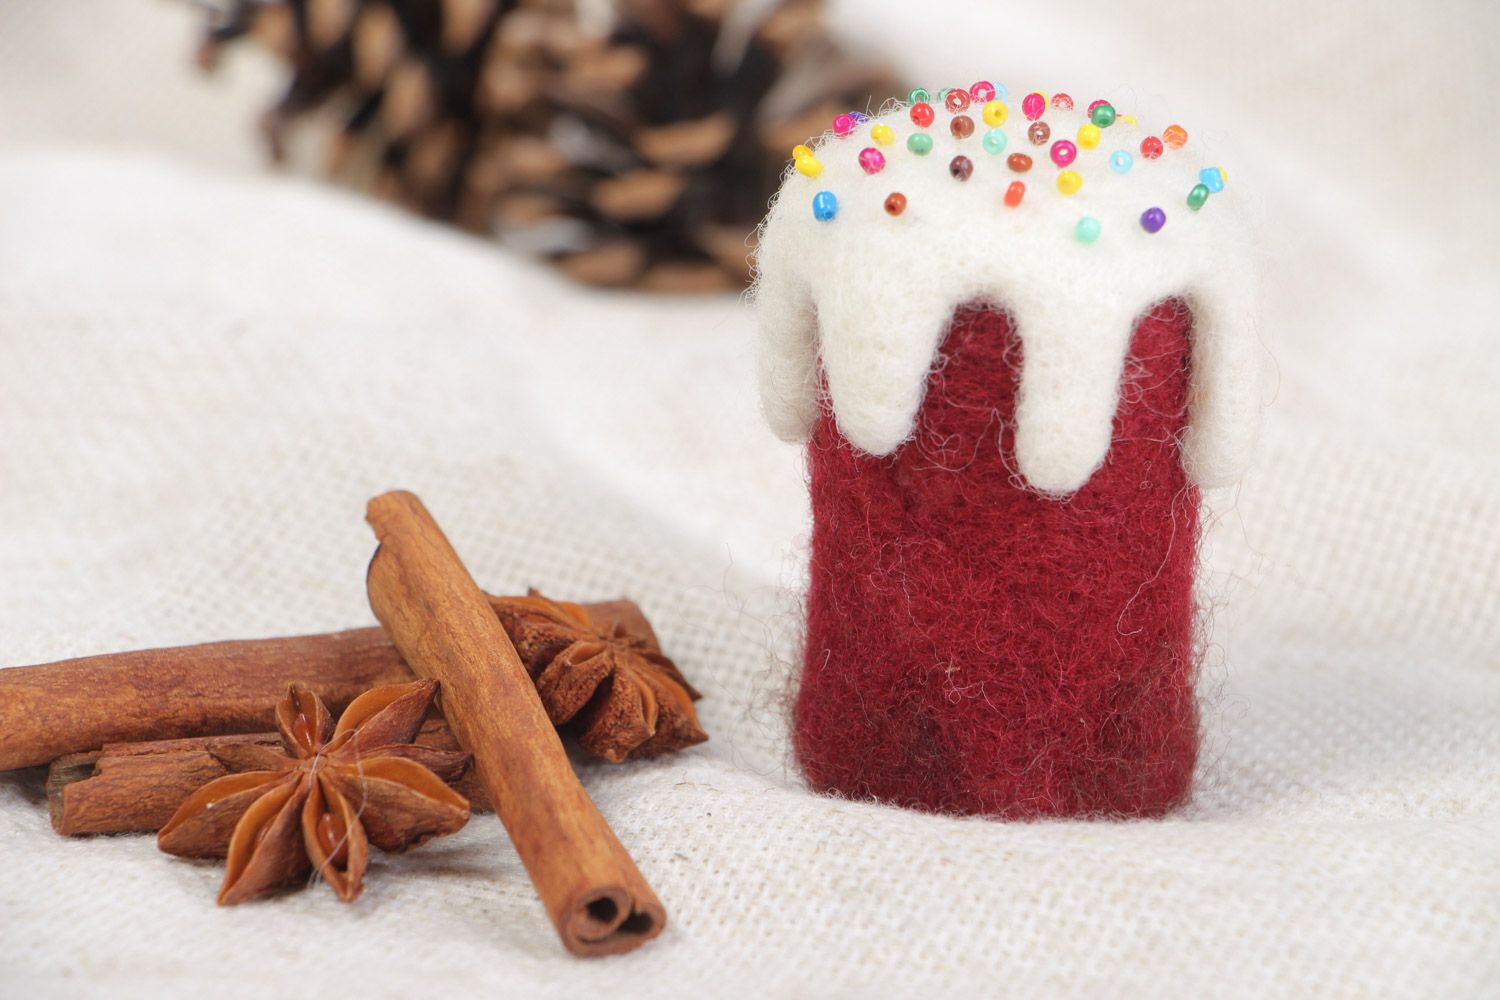 Handmade small decorative Easter cake felted of natural wool with colorful beads photo 1